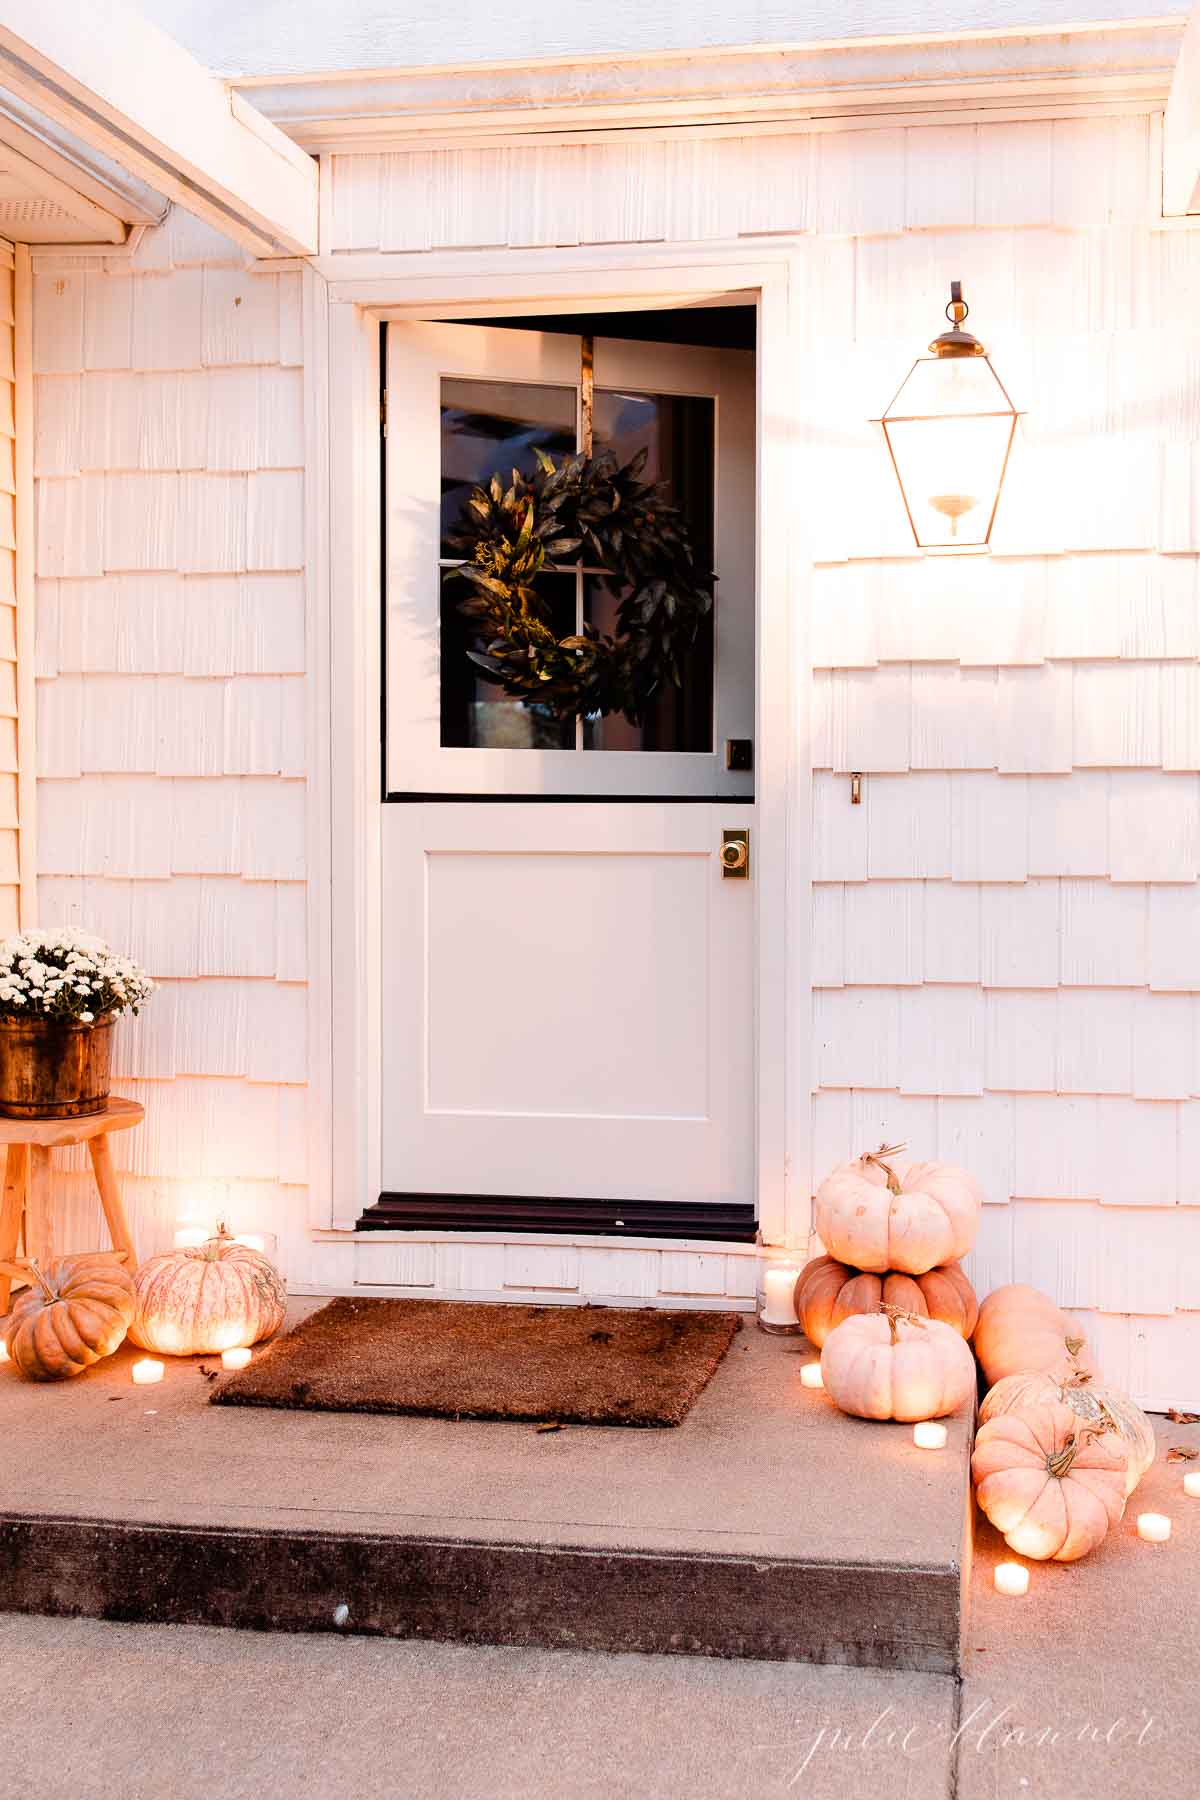 A minimalist front porch adorned with pumpkins and candles, perfect for fall decor.